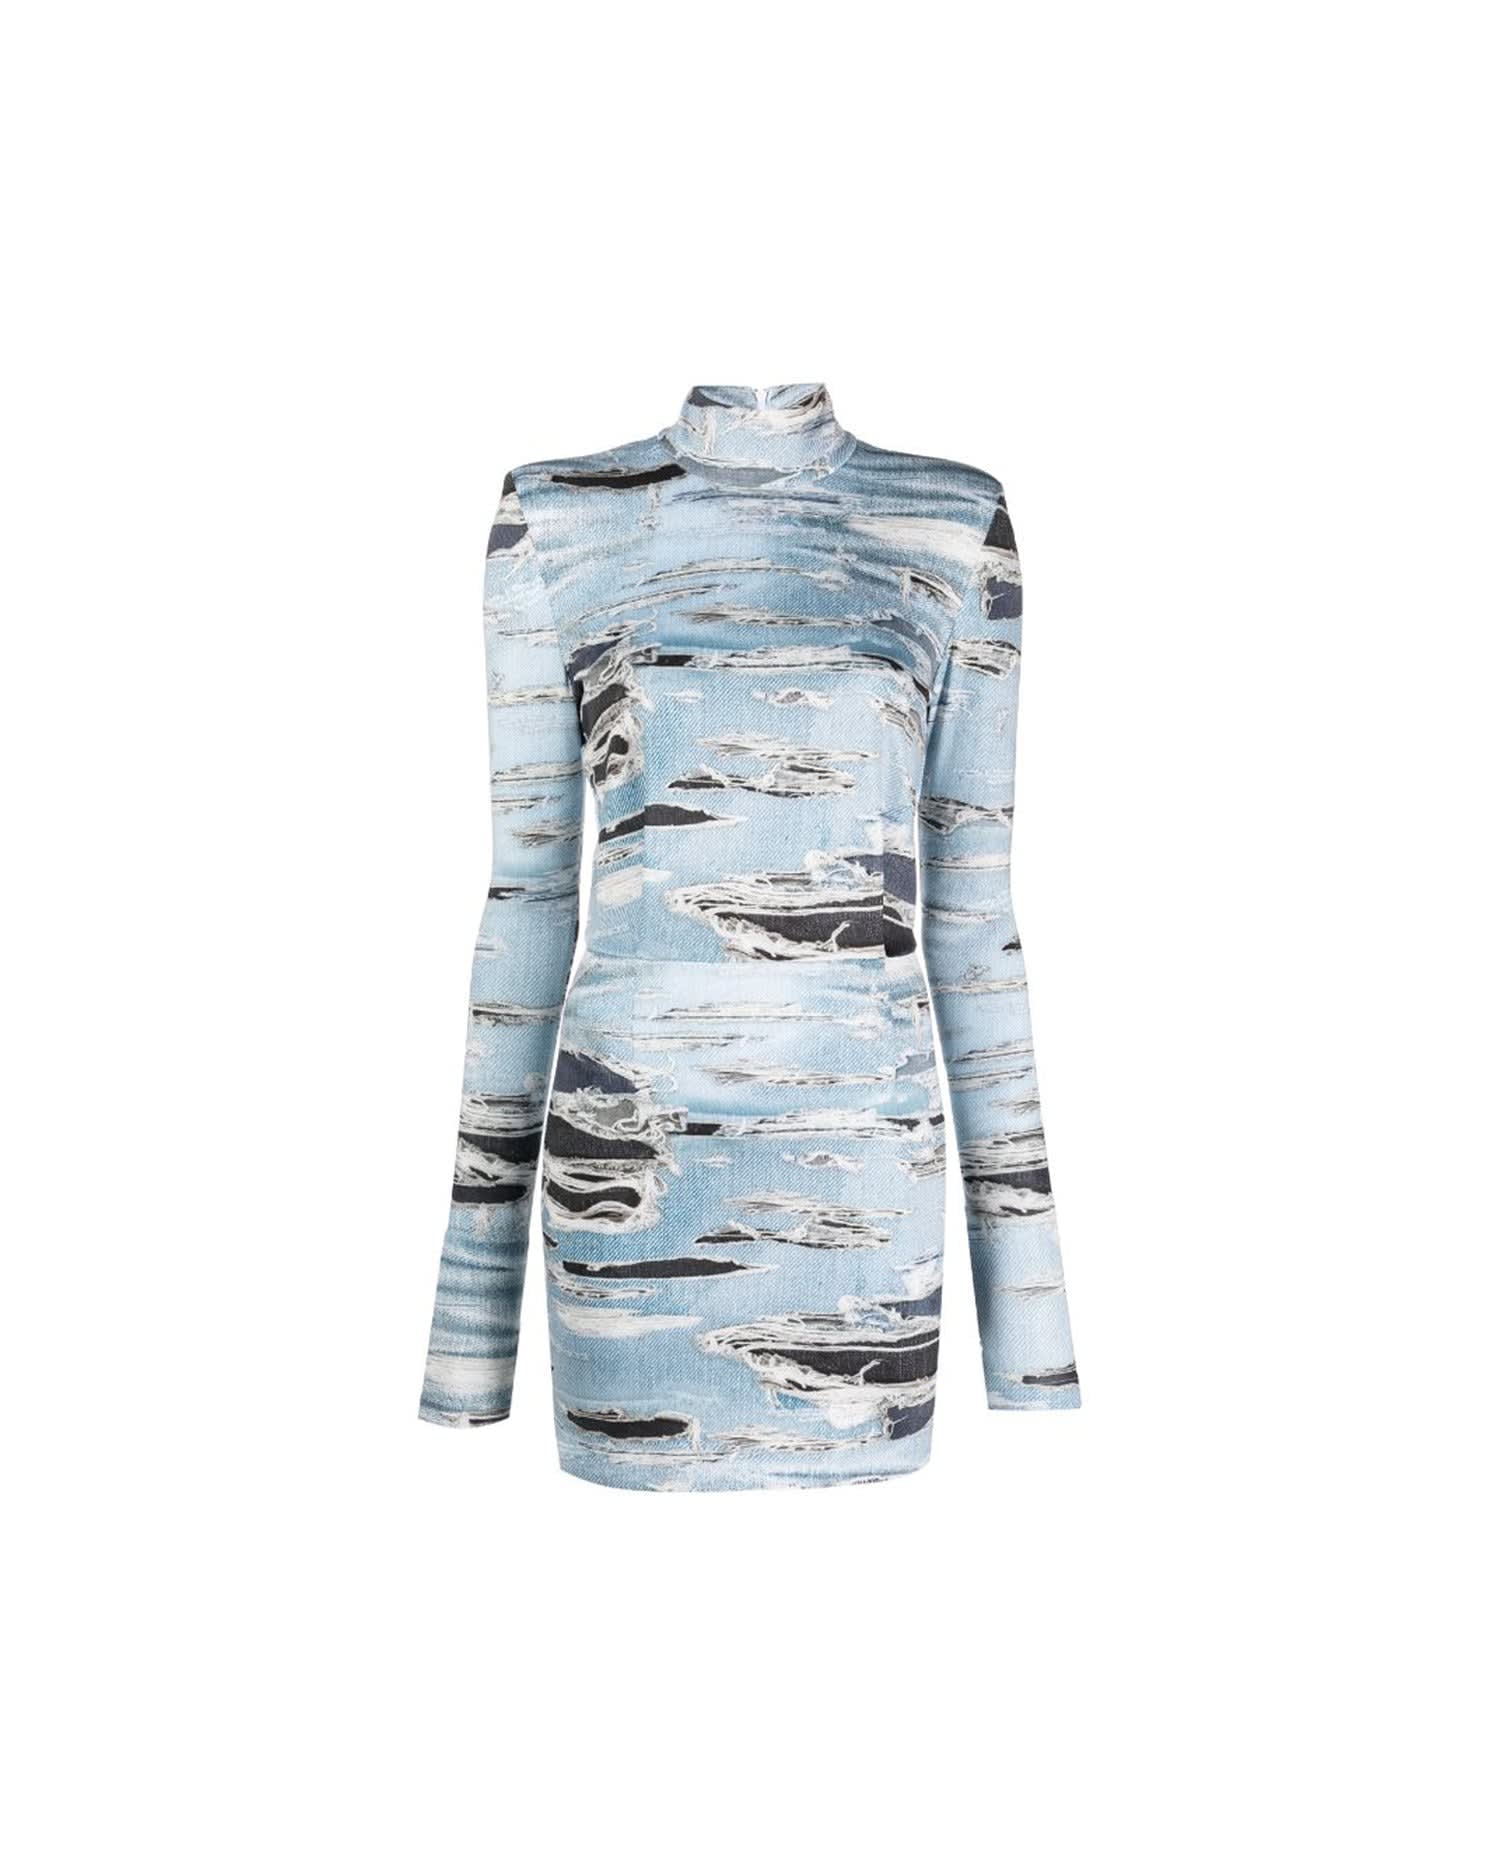 Short Dress With Iconic Runway Denim-effect Pattern. High Collar And Long Sleeves.